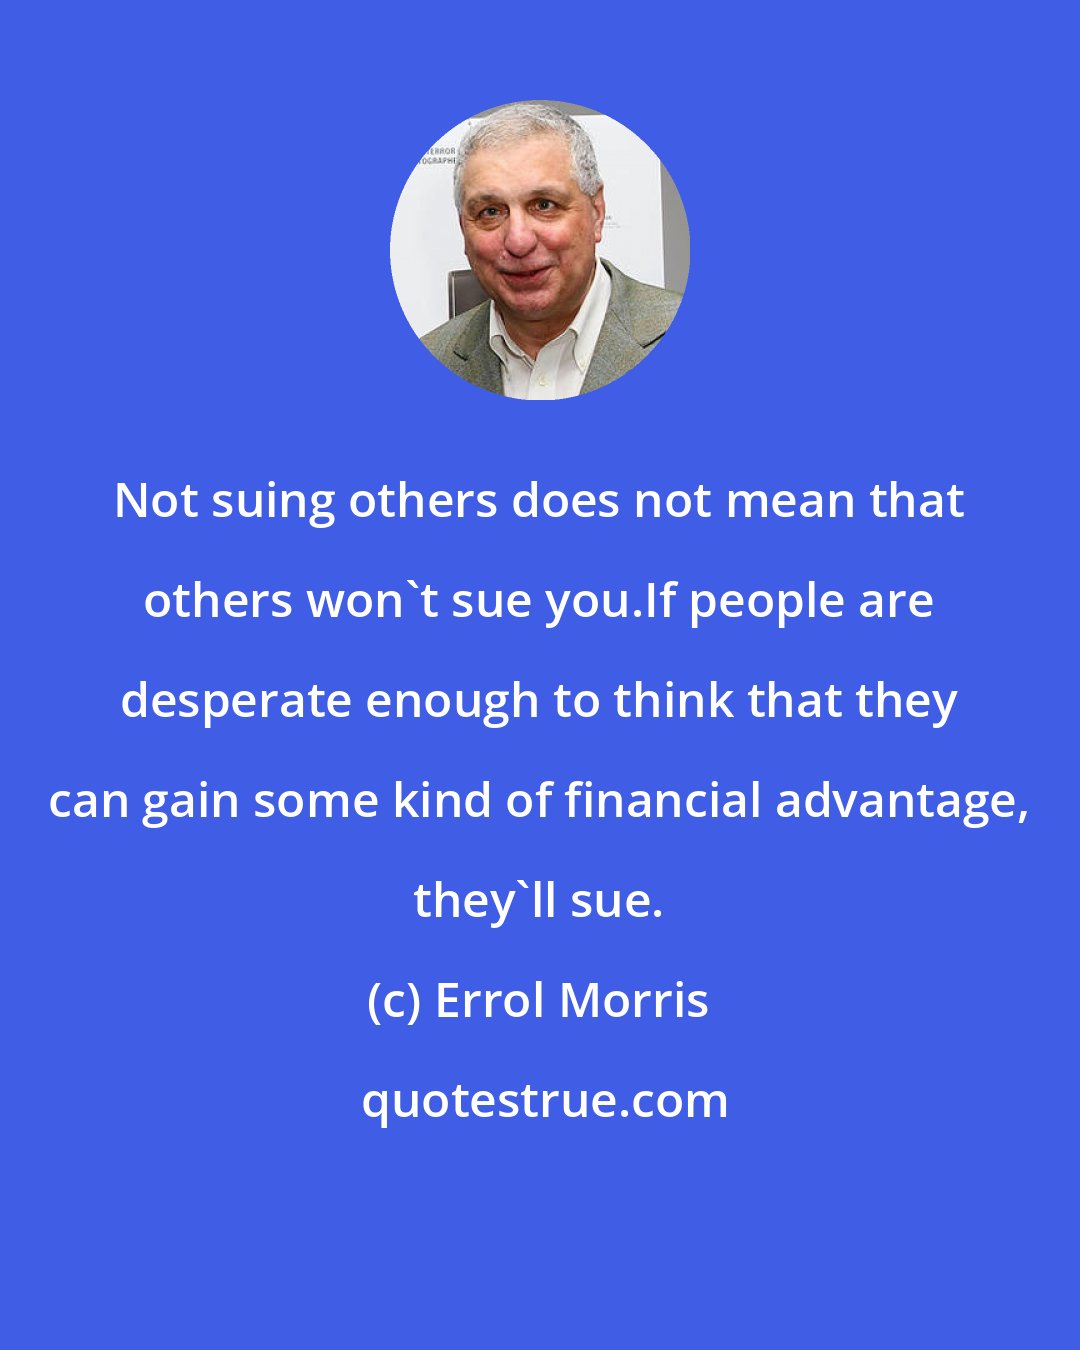 Errol Morris: Not suing others does not mean that others won't sue you.If people are desperate enough to think that they can gain some kind of financial advantage, they'll sue.